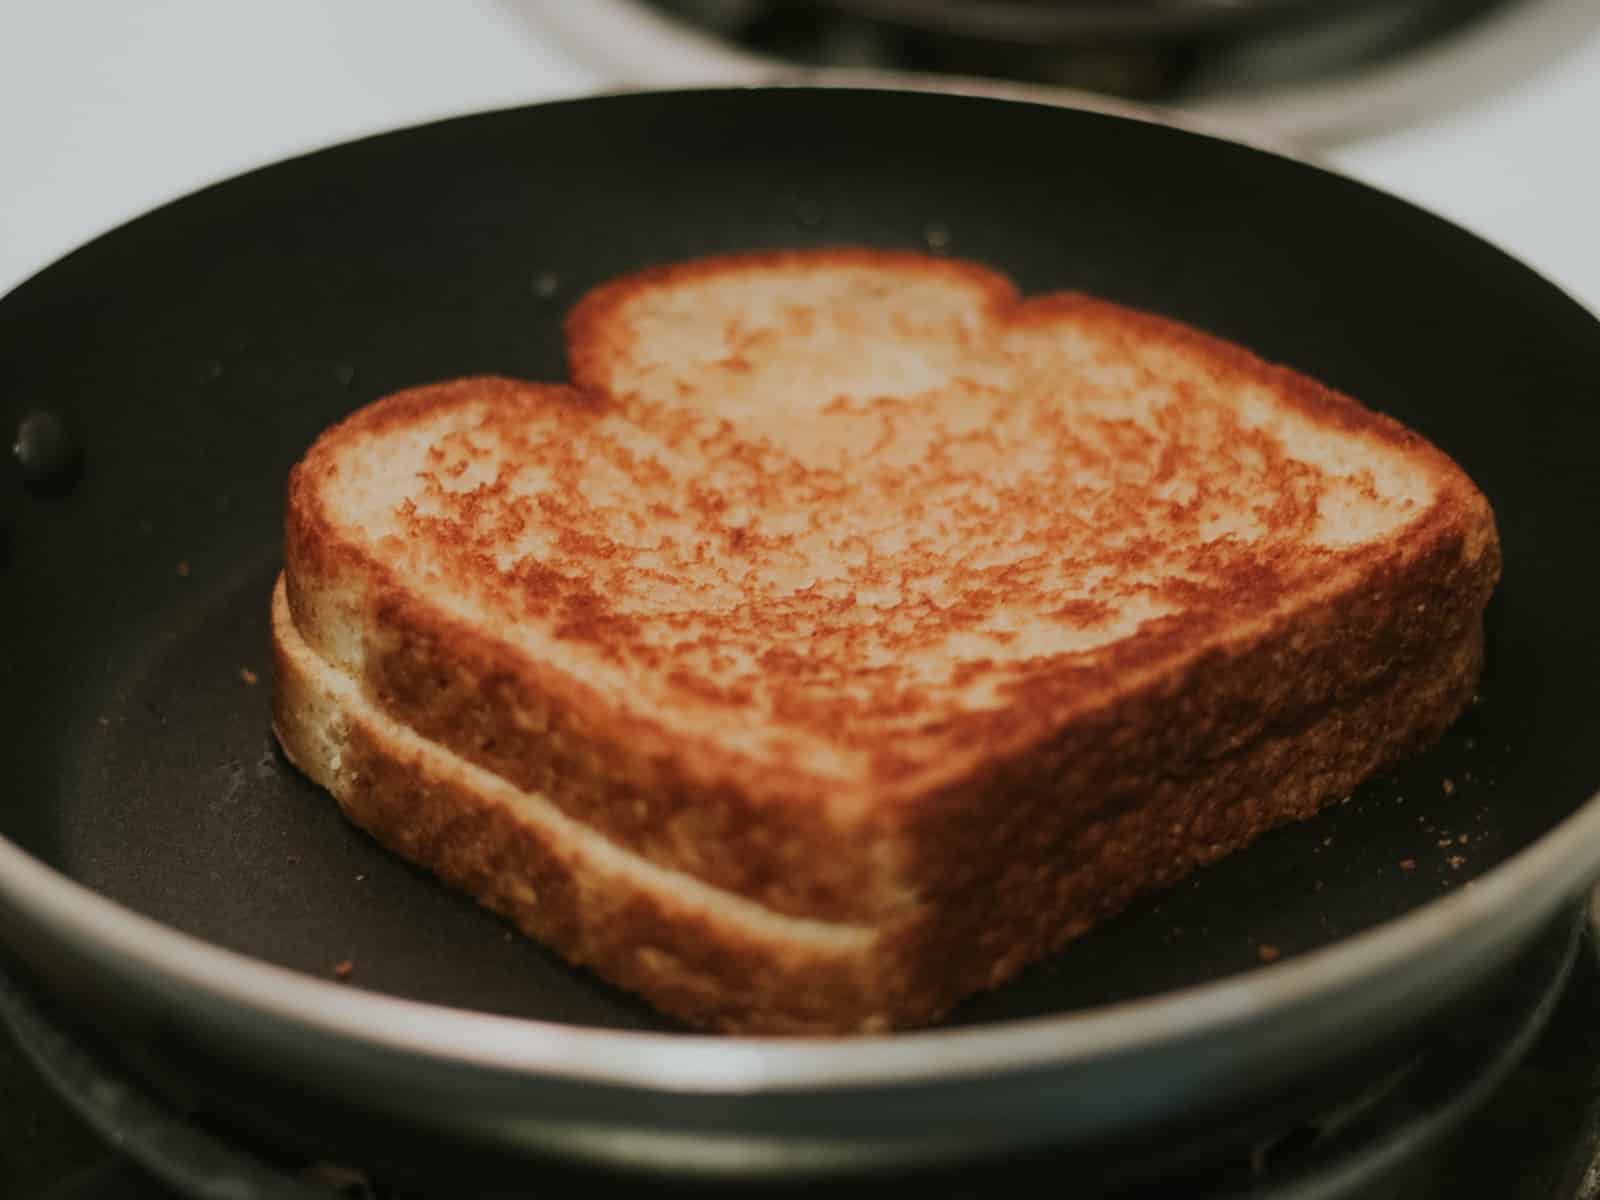 a toasted sandwich in a frying pan on a stove